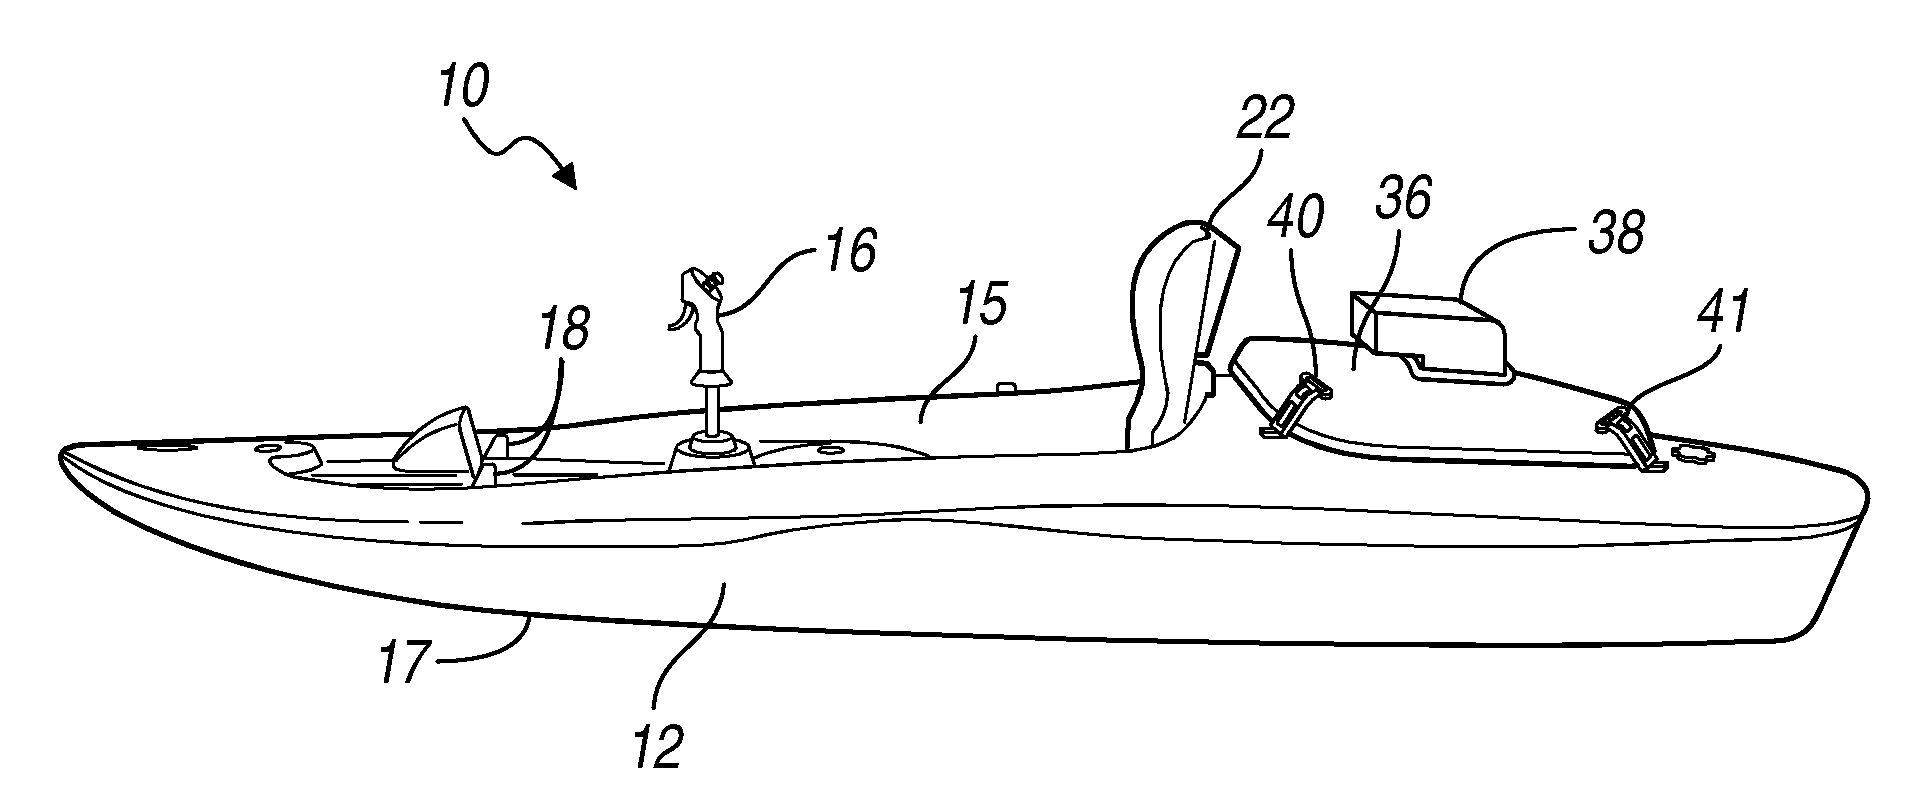 Watercraft propelled by a water jet